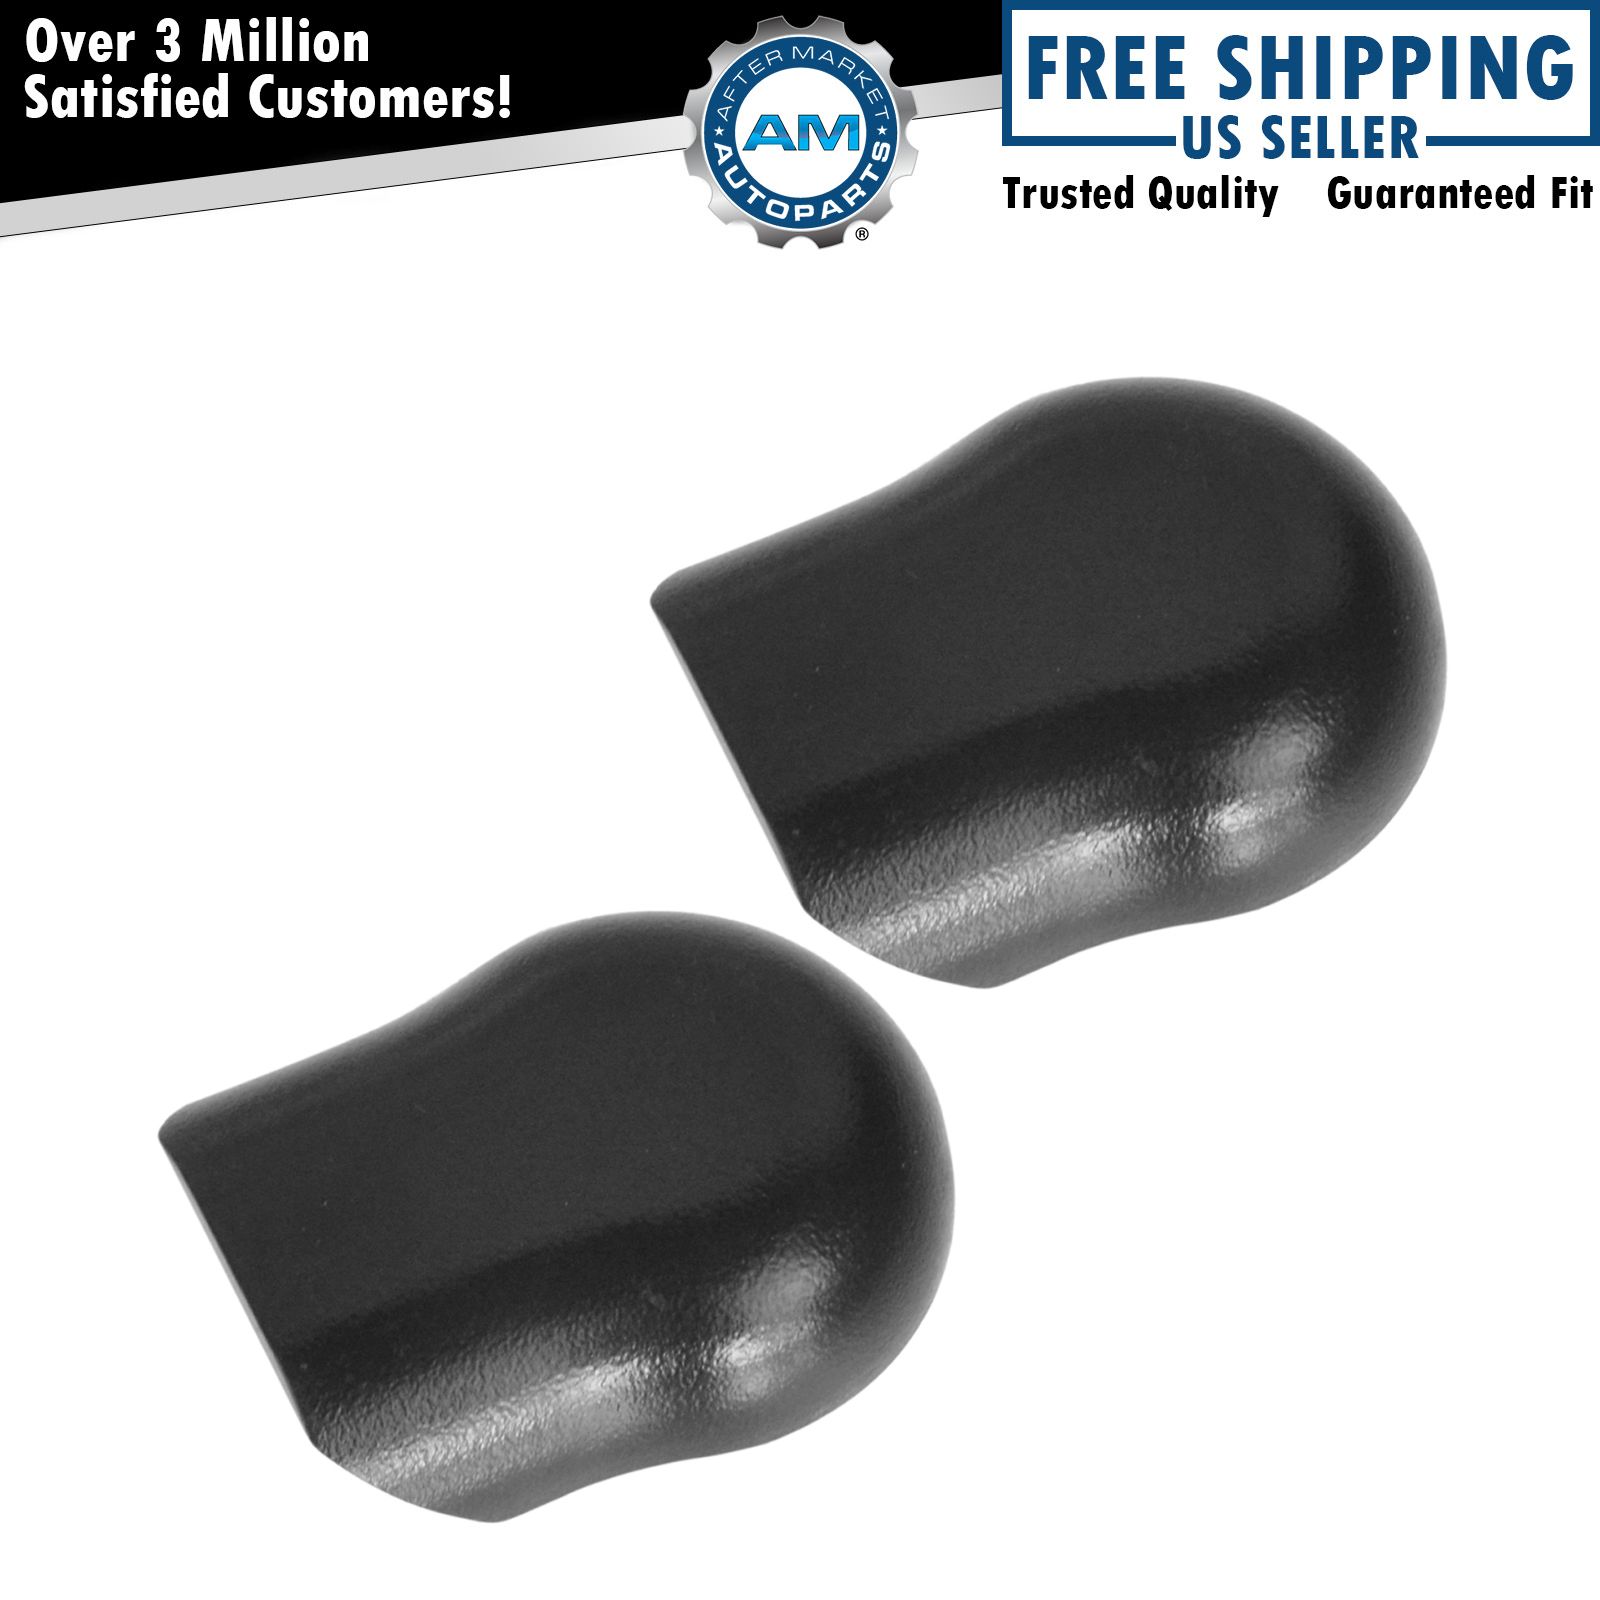 OEM Windshield Wiper Arm Nut Covers Front LH & RH Pair Set of 2 for Ford Lincoln